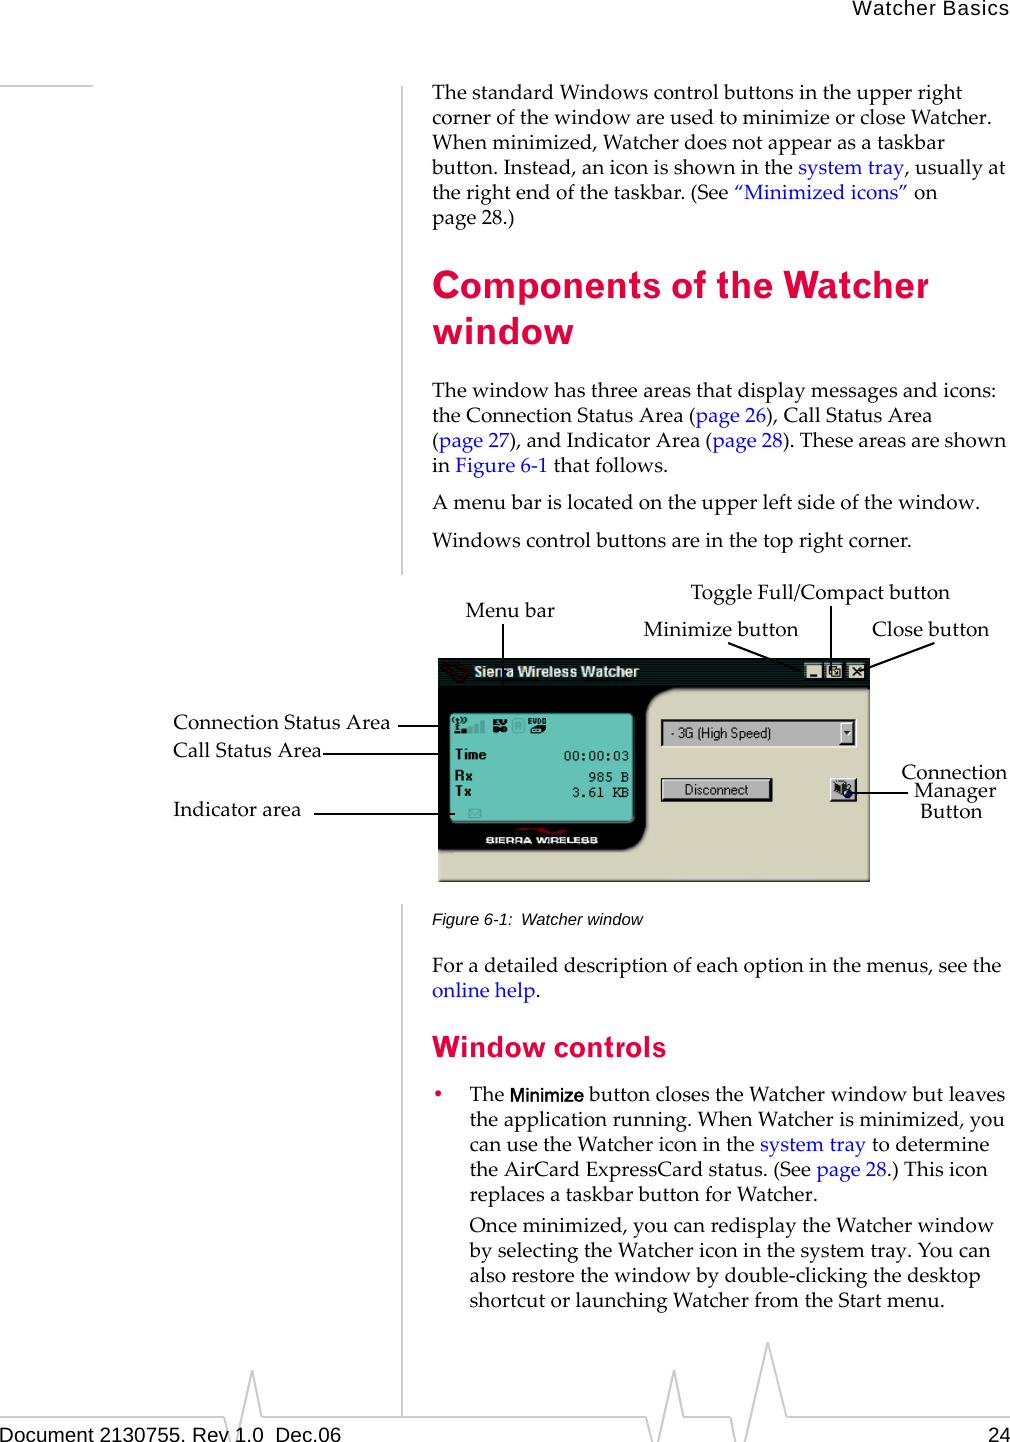 Watcher BasicsDocument 2130755. Rev 1.0  Dec.06 24ThestandardWindowscontrolbuttonsintheupperrightcornerofthewindowareusedtominimizeorcloseWatcher.Whenminimized,Watcherdoesnotappearasataskbarbutton.Instead,aniconisshowninthesystemtray,usuallyattherightendofthetaskbar.(See“Minimizedicons”onpage 28.)Components of the Watcher windowThewindowhasthreeareasthatdisplaymessagesandicons:theConnectionStatusArea(page 26),CallStatusArea(page 27),andIndicatorArea(page 28).TheseareasareshowninFigure 6‐1thatfollows.Amenubarislocatedontheupperleftsideofthewindow.Windowscontrolbuttonsareinthetoprightcorner.Figure 6-1: Watcher windowForadetaileddescriptionofeachoptioninthemenus,seetheonlinehelp.Window controls•TheMinimizebuttonclosestheWatcherwindowbutleavestheapplicationrunning.WhenWatcherisminimized,youcanusetheWatchericoninthesystemtraytodeterminetheAirCardExpressCardstatus.(Seepage 28.)ThisiconreplacesataskbarbuttonforWatcher.Onceminimized,youcanredisplaytheWatcherwindowbyselectingtheWatchericoninthesystemtray.Youcanalsorestorethewindowbydouble‐clickingthedesktopshortcutorlaunchingWatcherfromtheStartmenu.ToggleFull/CompactbuttonClosebuttonMinimizebuttonMenubarConnectionStatusAreaCallStatusAreaIndicatorarea ButtonManagerConnection